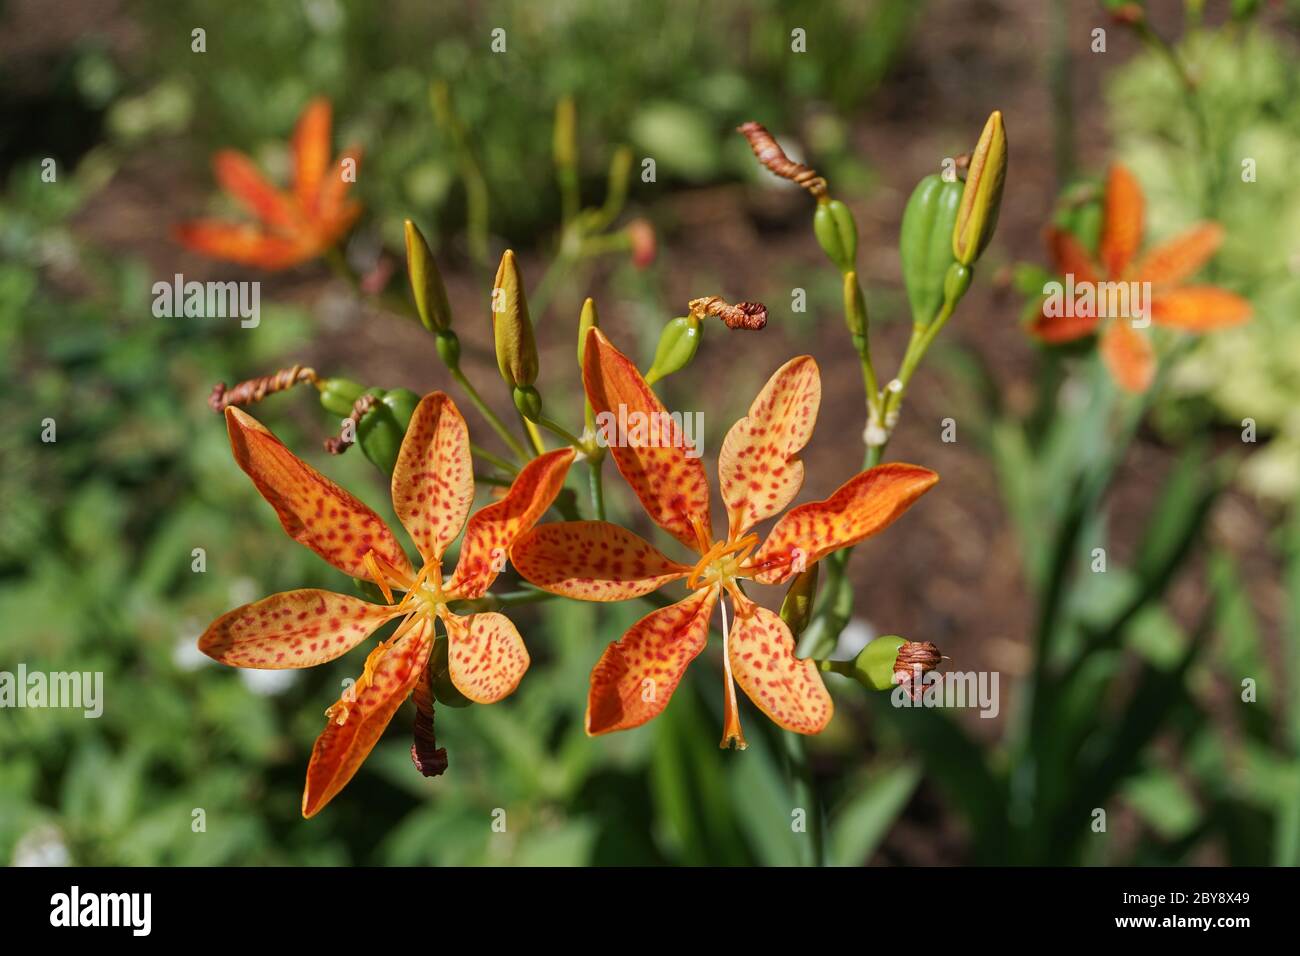 The Blackberry Lily or Leopard Lily (Belamcanda chinensis), the sole species in the genus Belamcanda, was transferred to the genus Iris in 2005. Stock Photo